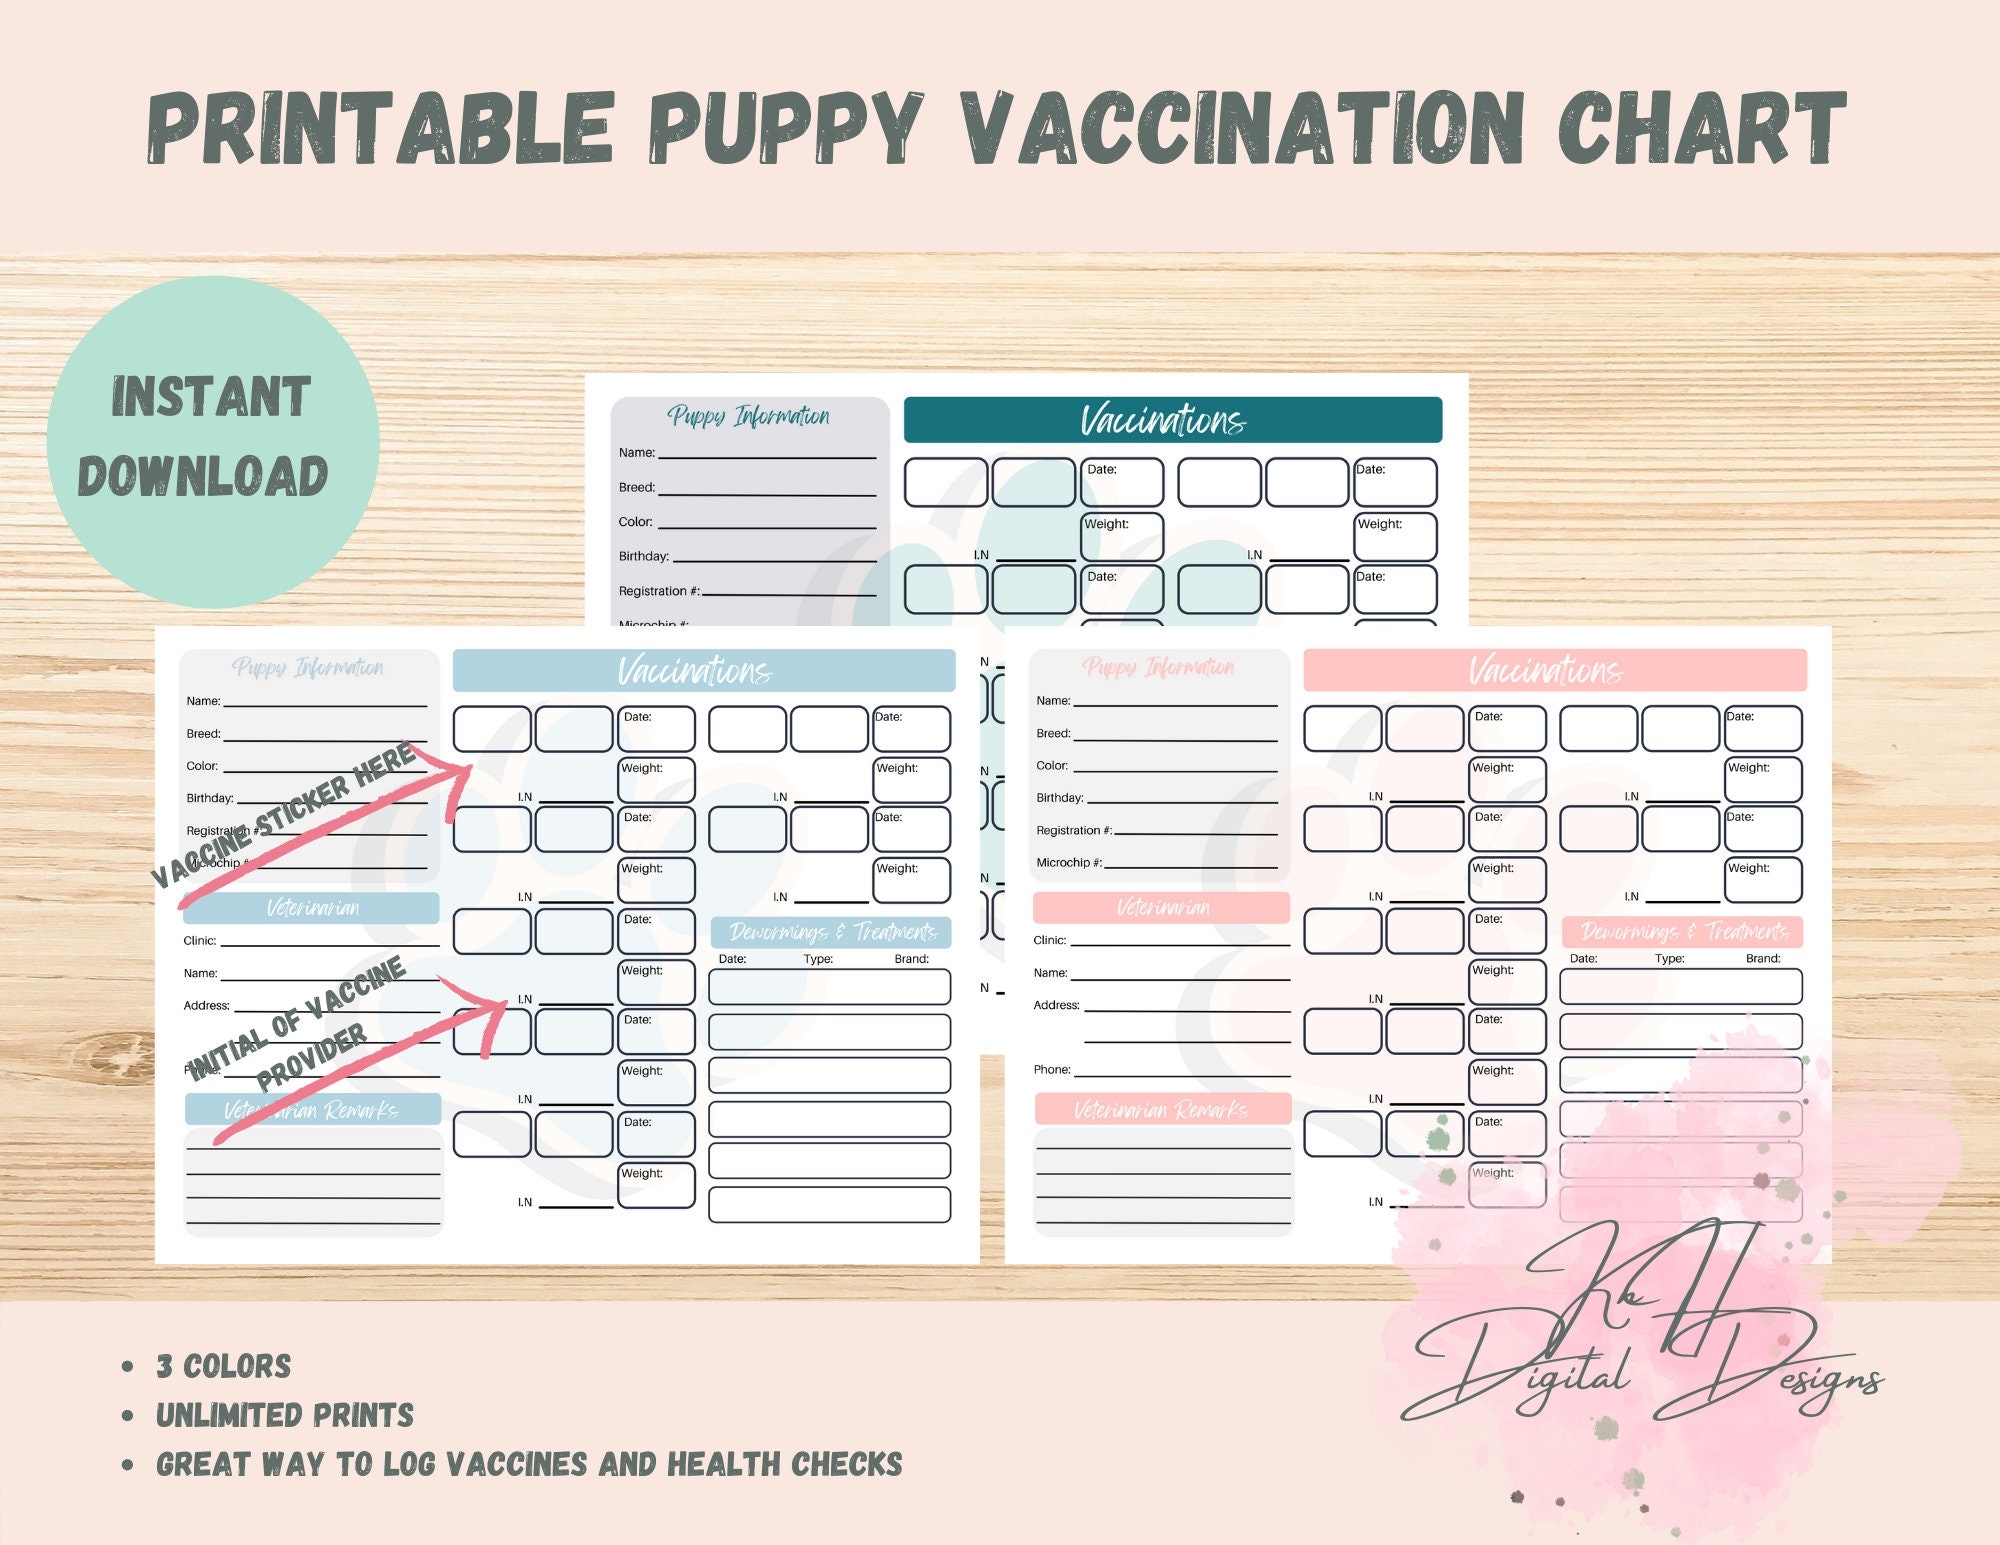 Printable Vaccine Schedule For Dogs